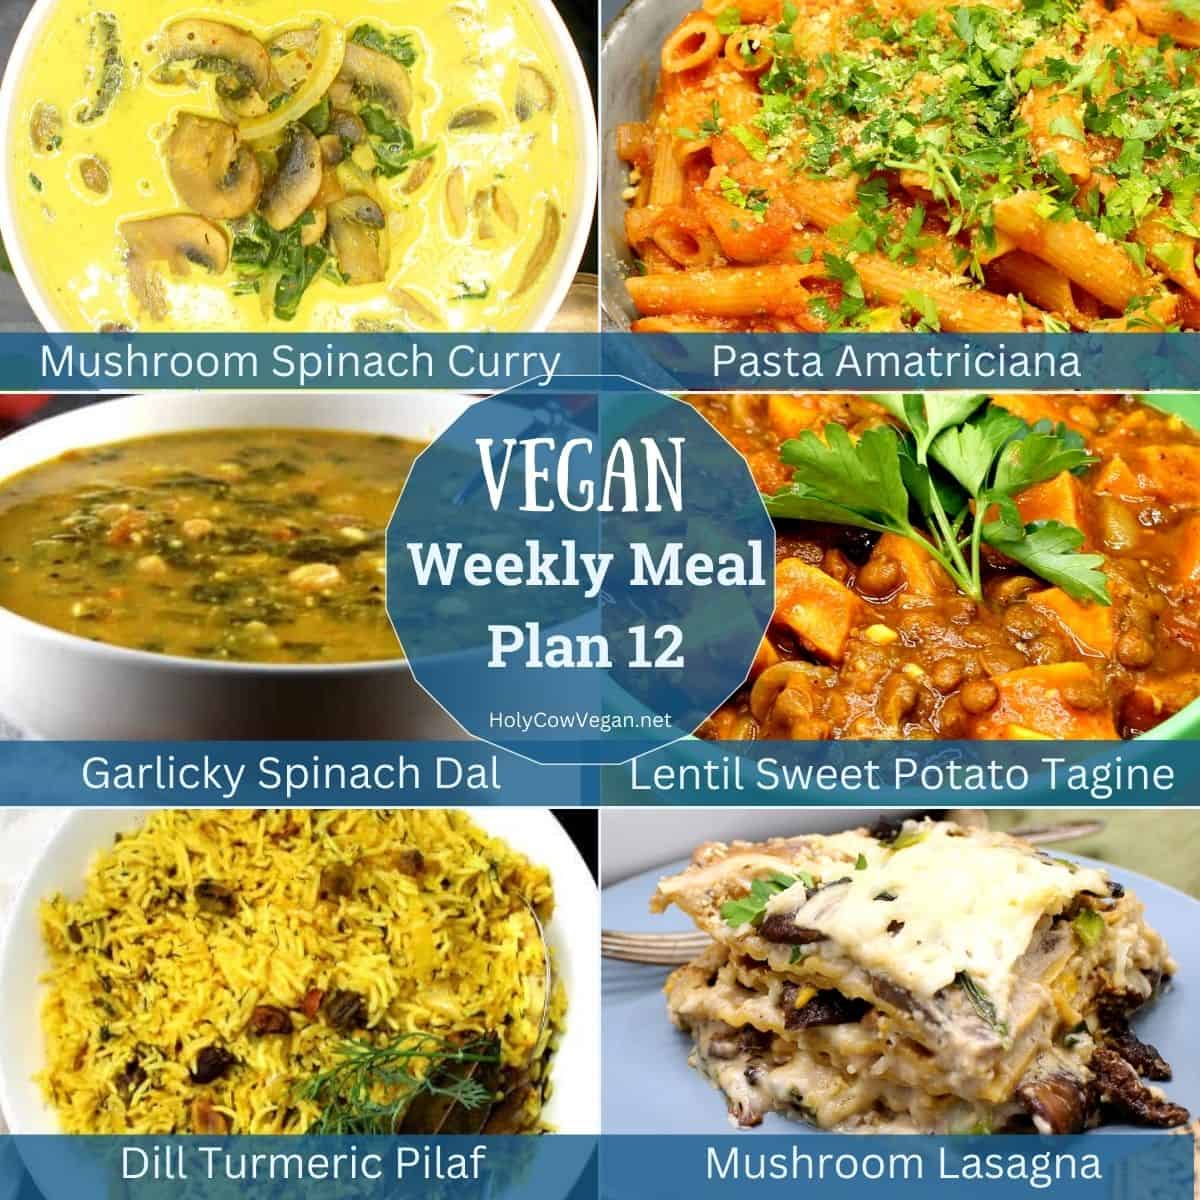 Cover image for vegan meal plan 12 from holycowvegan with text that says "vegan weekly meal plan 12."